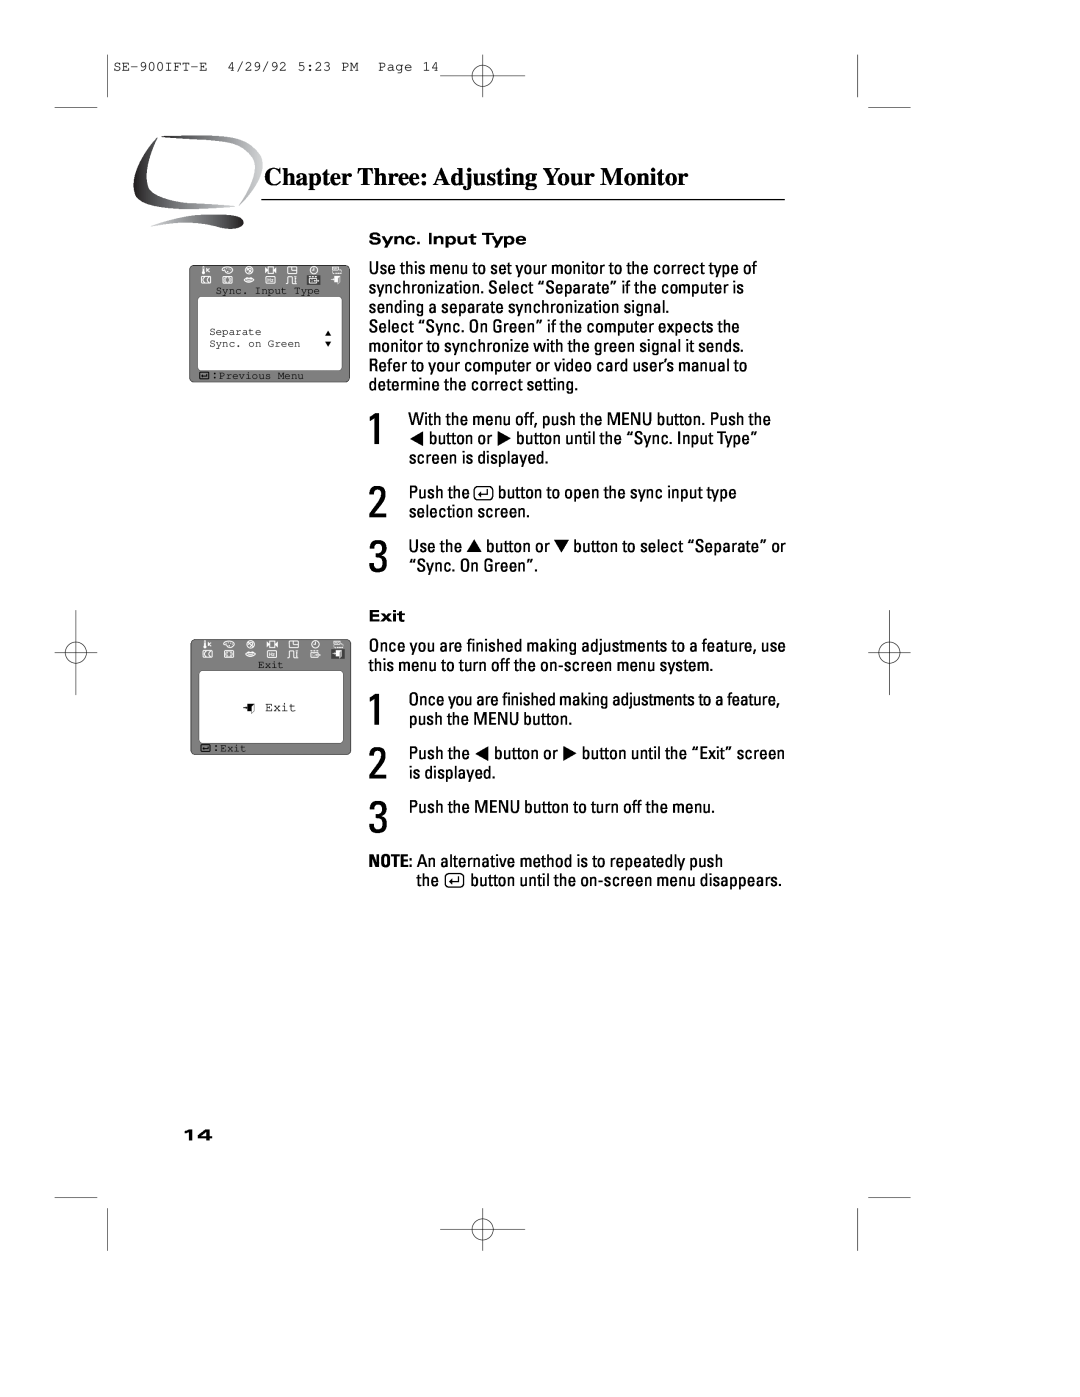 Samsung 900IFT manual Chapter Three Adjusting Your Monitor, Sync. Input Type, Exit 